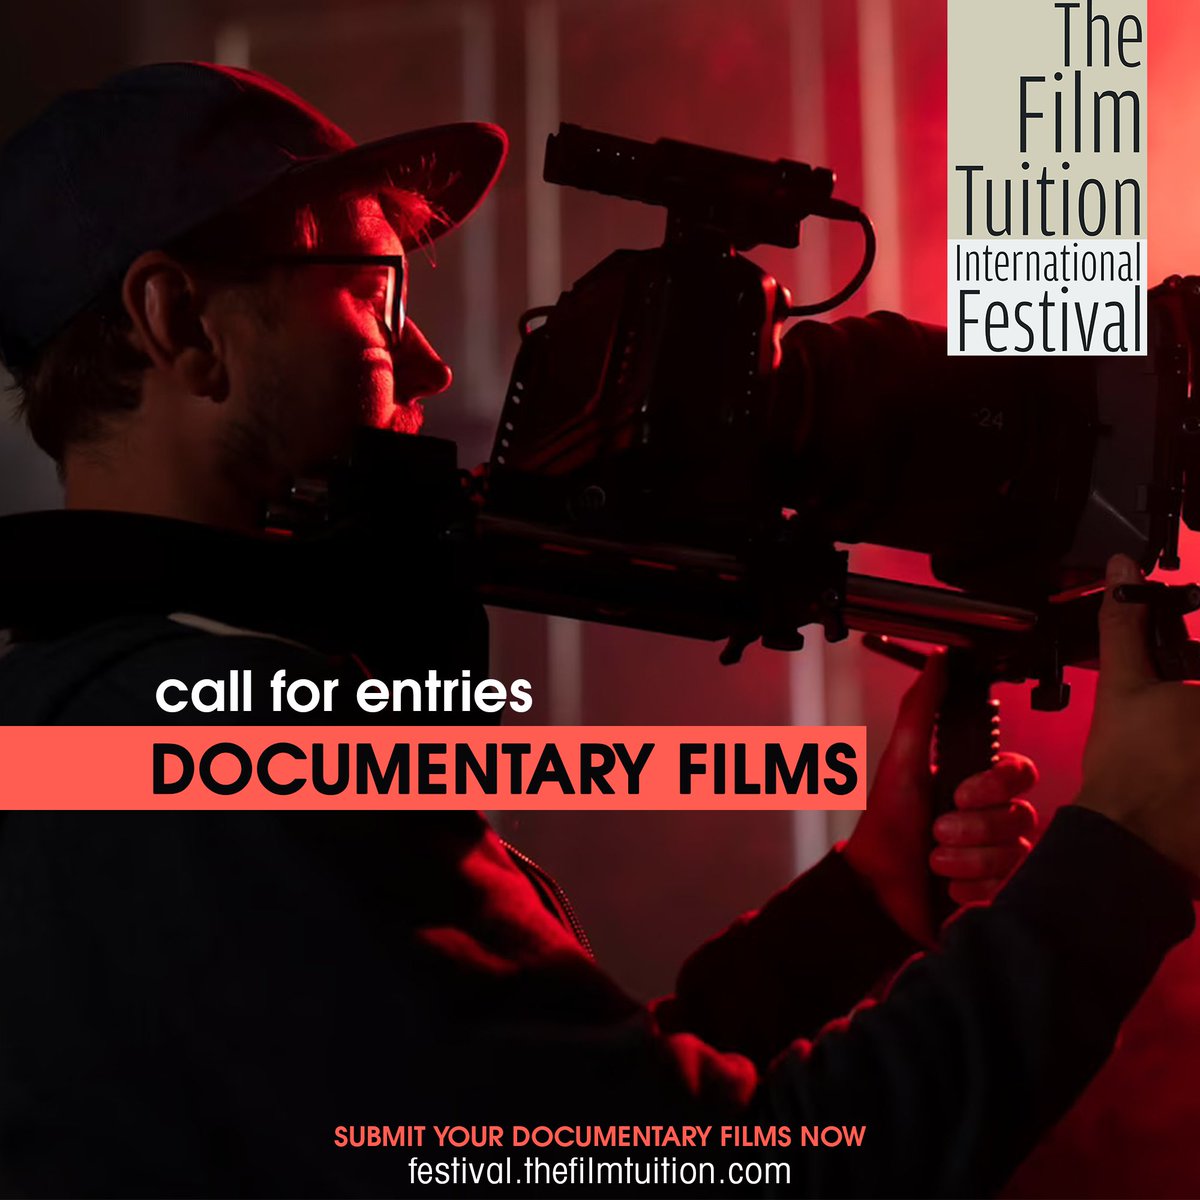 #CALLFORENTRIES 
#DOCUMENTARY #FILMS

#Submit your #FILM now 
festival.thefilmtuition.com

#filmfest #filmfestival #filmfestivals #shortfilms #documentaries #animations #animators #filmmakers #filmmaker #filmmakerslife #filmfestivallife #animator #festival #producer #producers